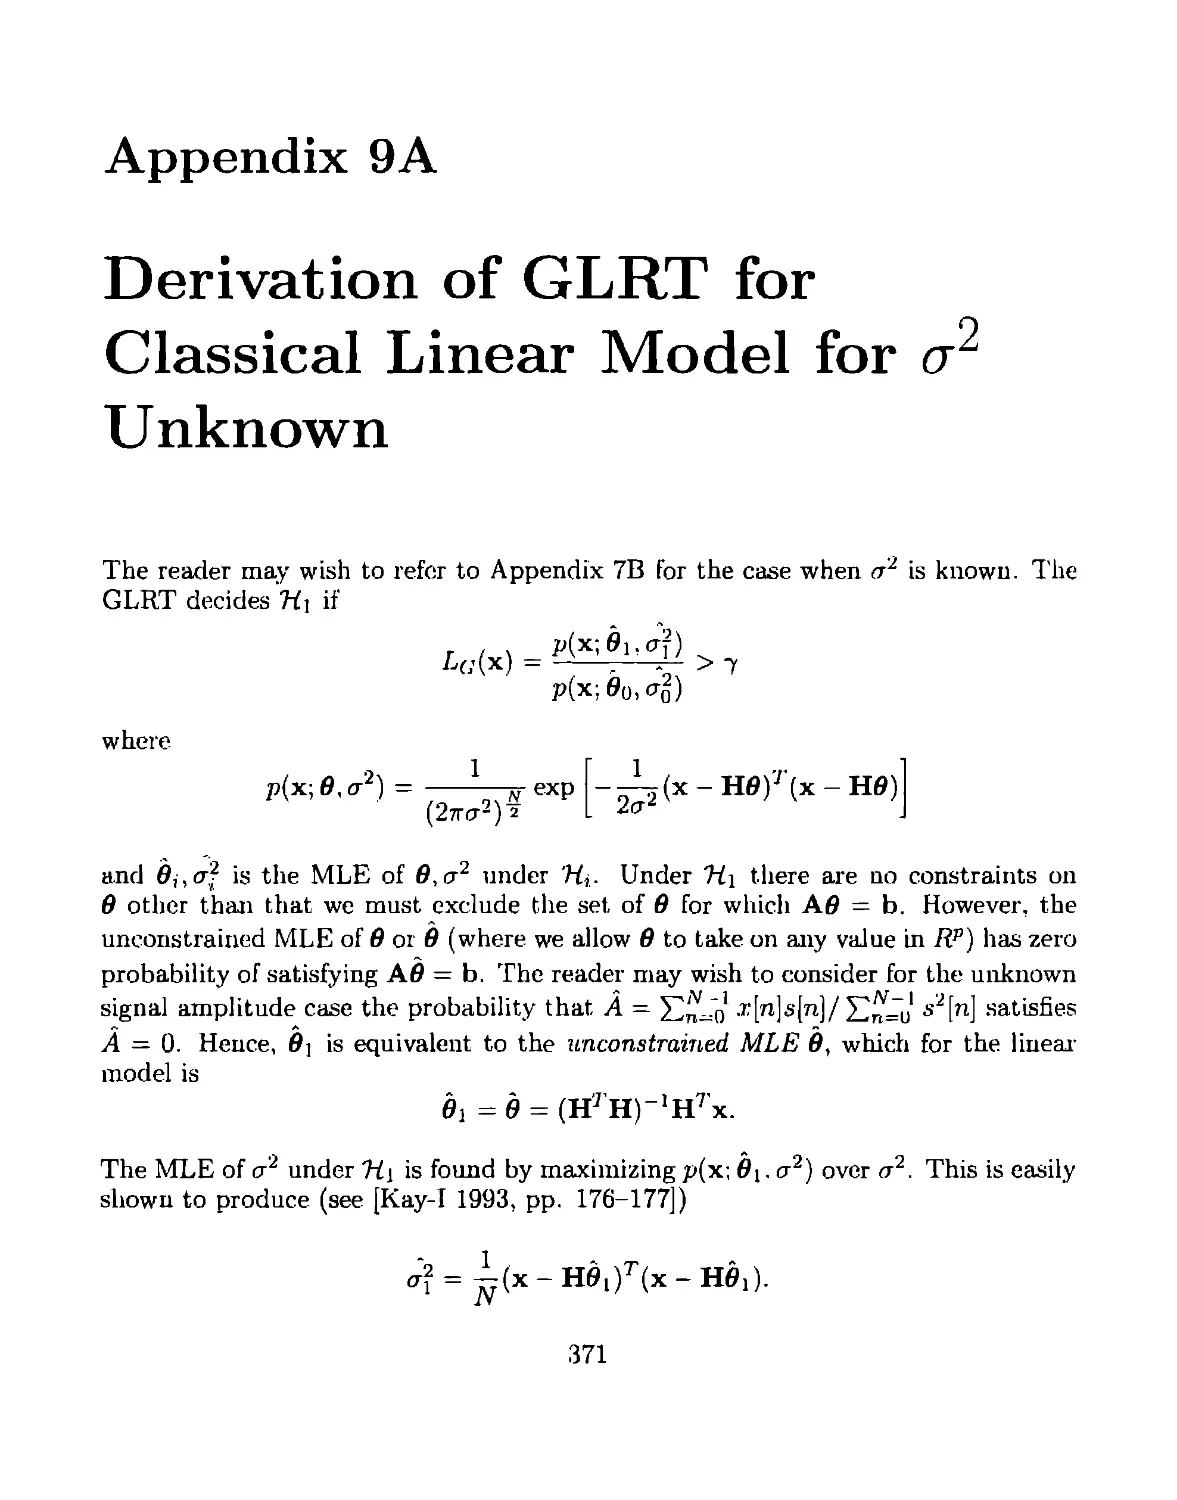 Appendix 9A Derivation of GLRT for Classical Linear Model for sigma-squared Unknown